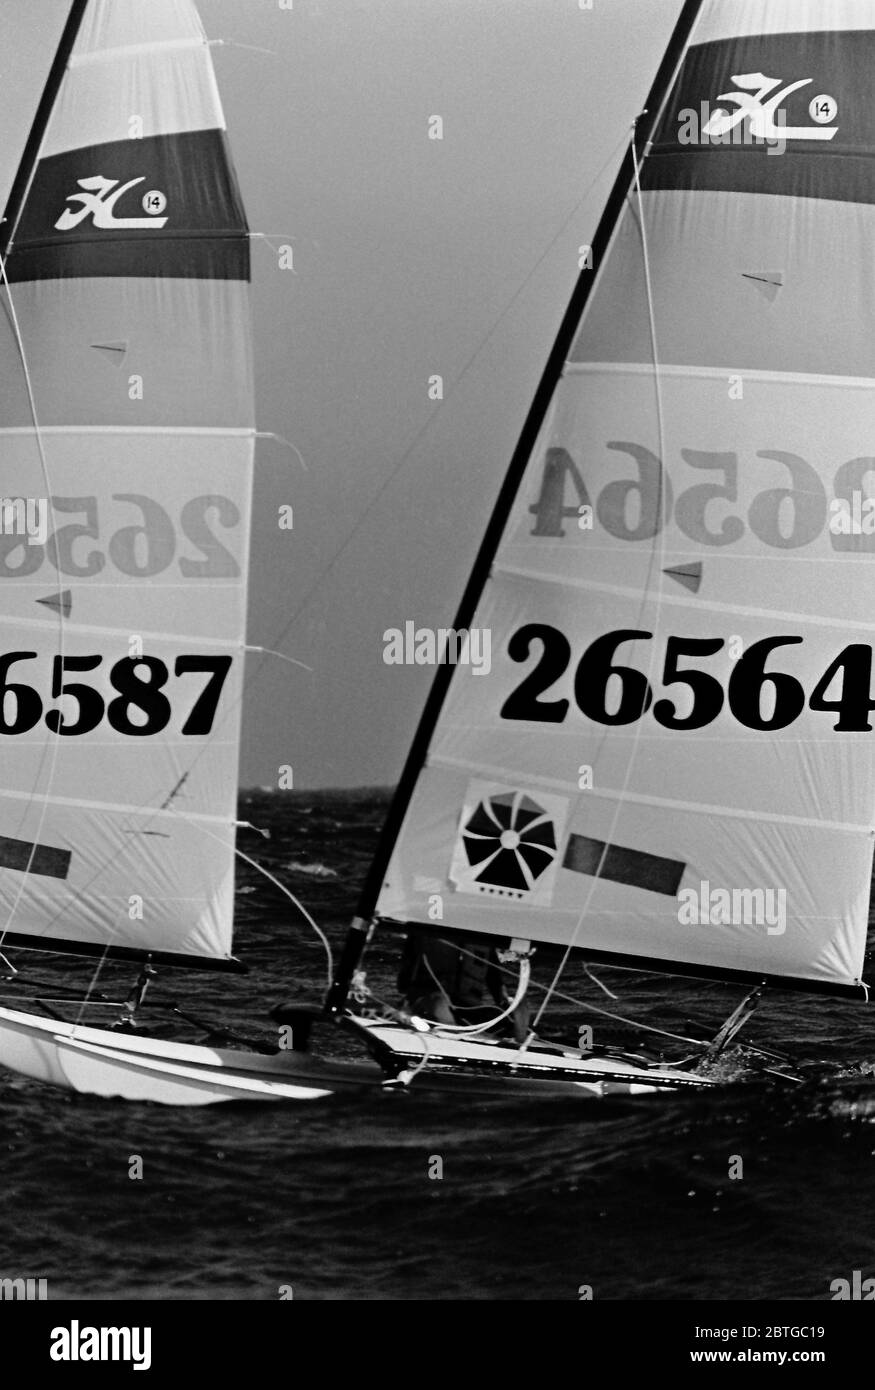 AJAXNETPHOTO. 1977. LAS SALINAS BAY, LANZAROTE, SPAIN. - COMPETITORS RACING IN A STIFF BREEZE AND CHOPPY WATERS IN THE HOBIE CAT 14 WORLD CHAMPIONSHIPS; SAIL NUMBERS 26587, 26564. PHOTO:JONATHAN EASTLAND/AJAX REF:7726091 7 Stock Photo